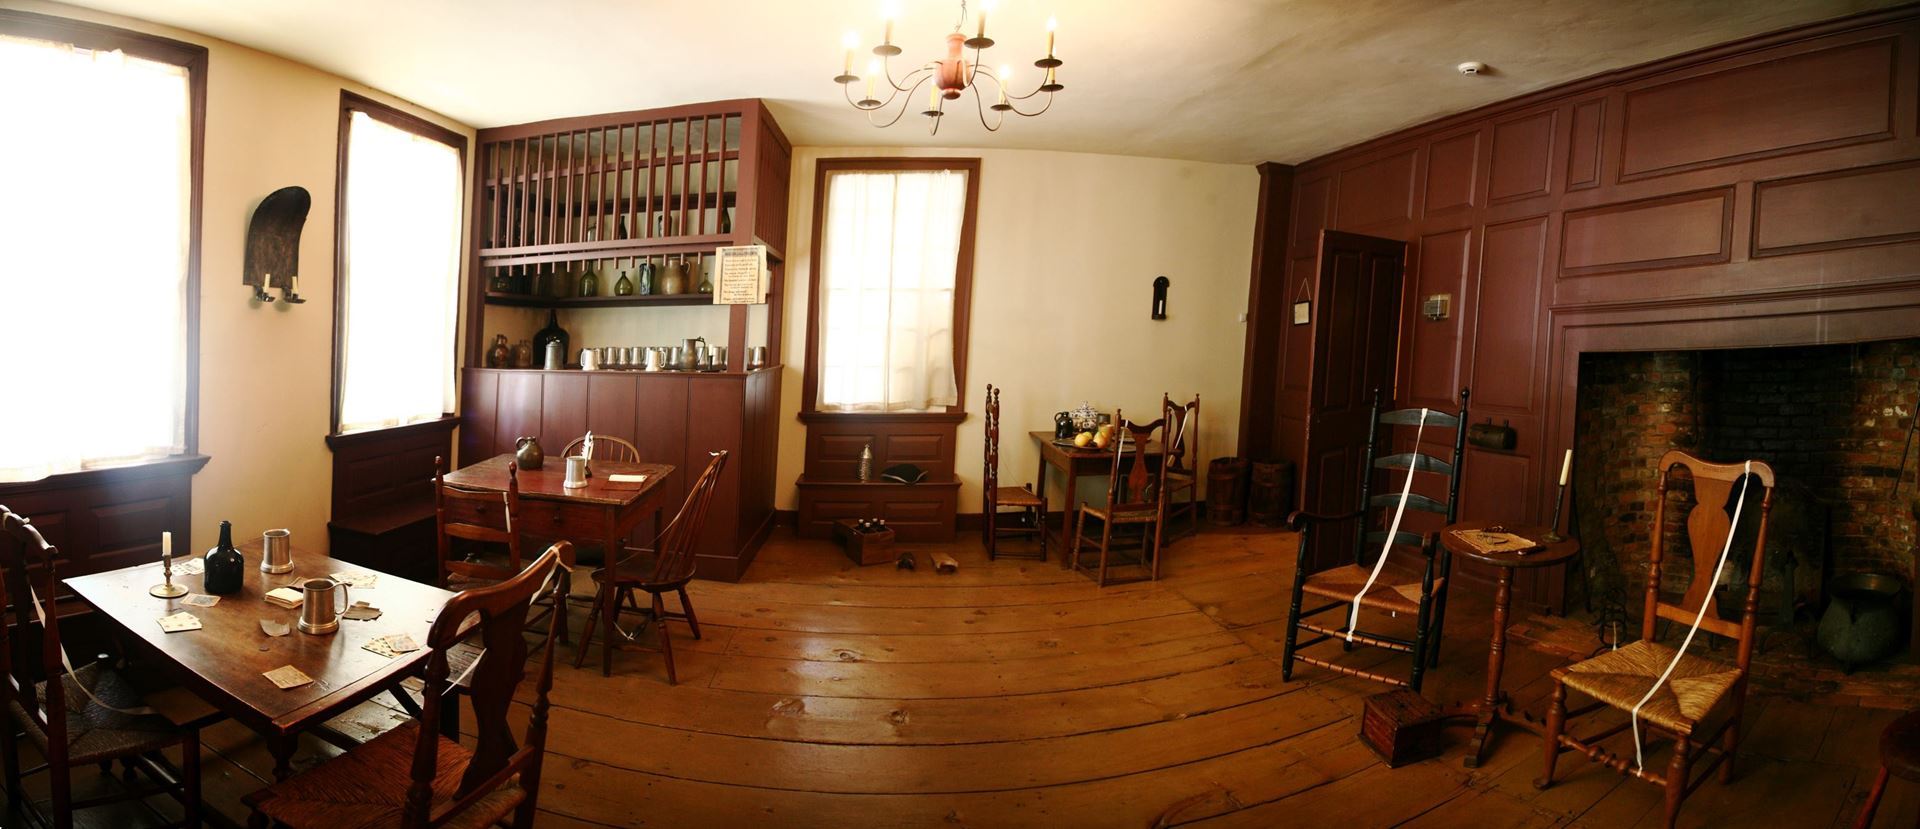 interior image of the Square House Inn, an 18th century building with colonial style furniture and large fireplace